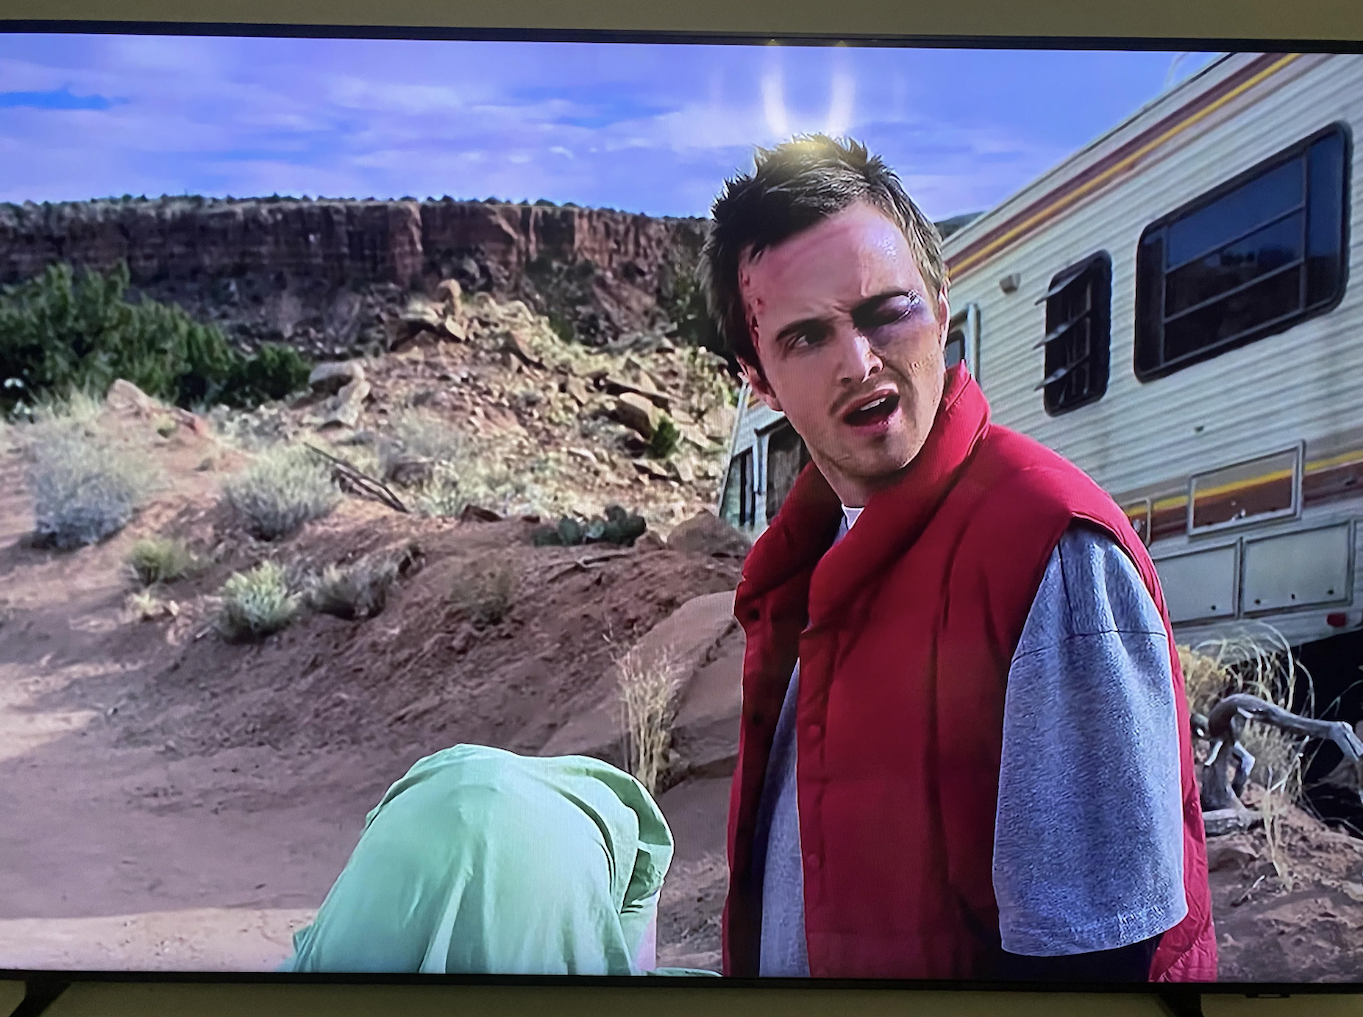 movie mistakes - - First episode of Breaking Bad. What is that thing on Walter’s back? He was wearing nothing but tighty whities and a shirt. Looks like a microphone pack.